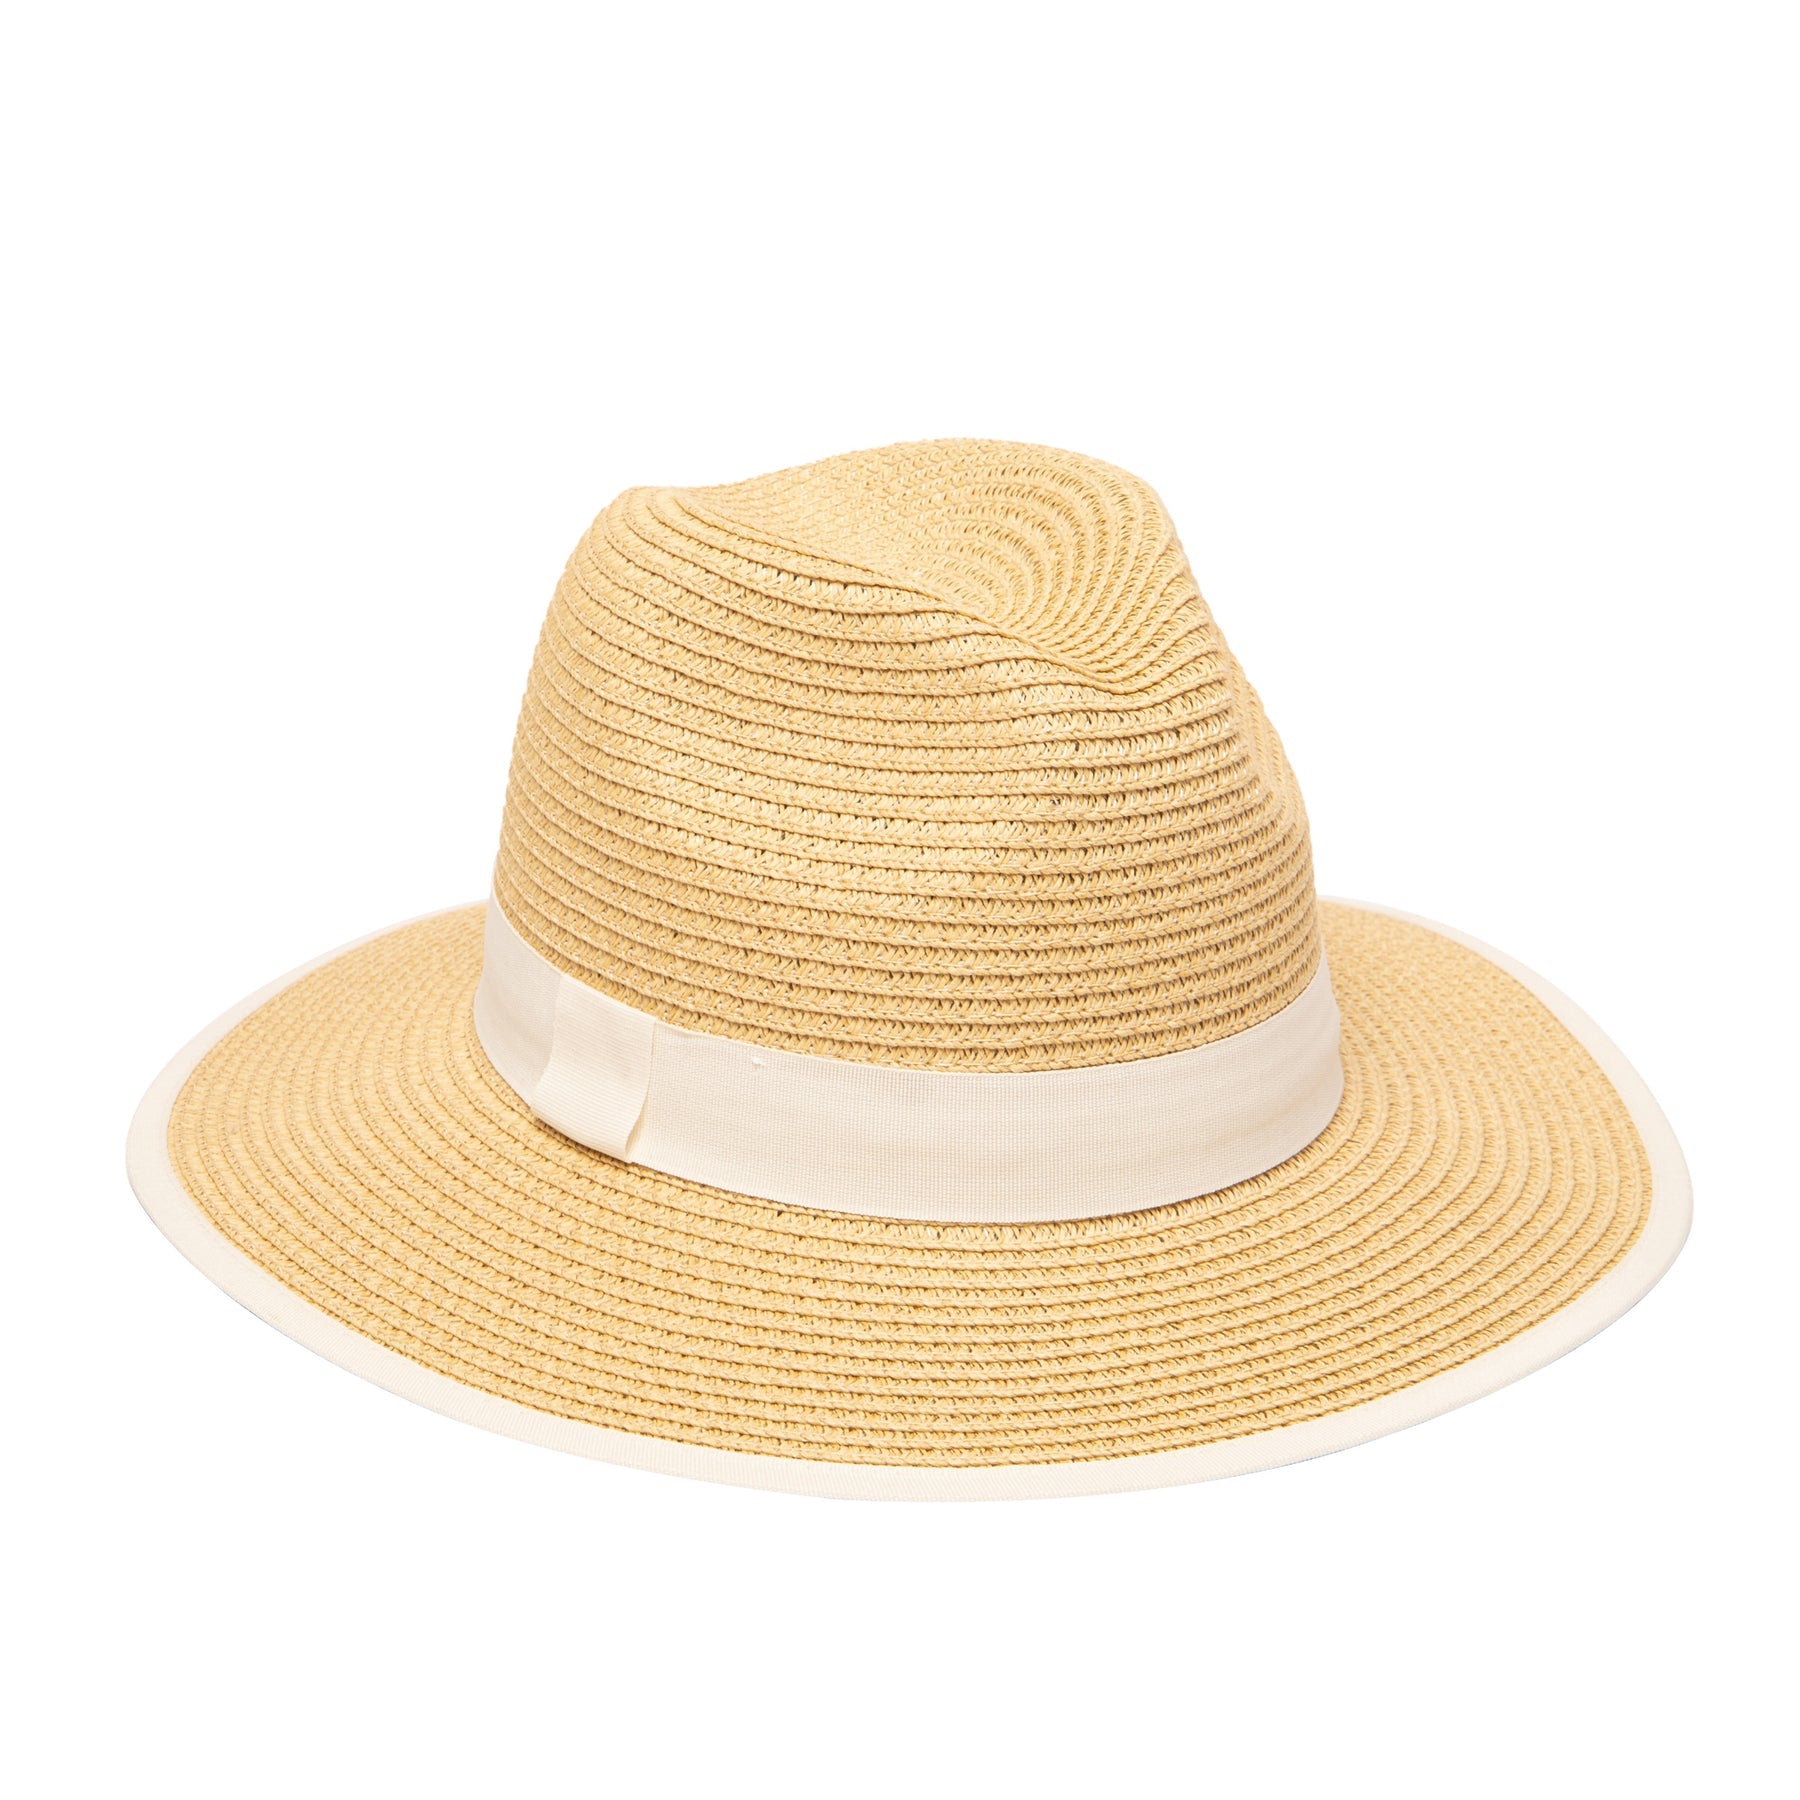 Paperbraid Fedora With Pop Color Grosgrain - Ivory